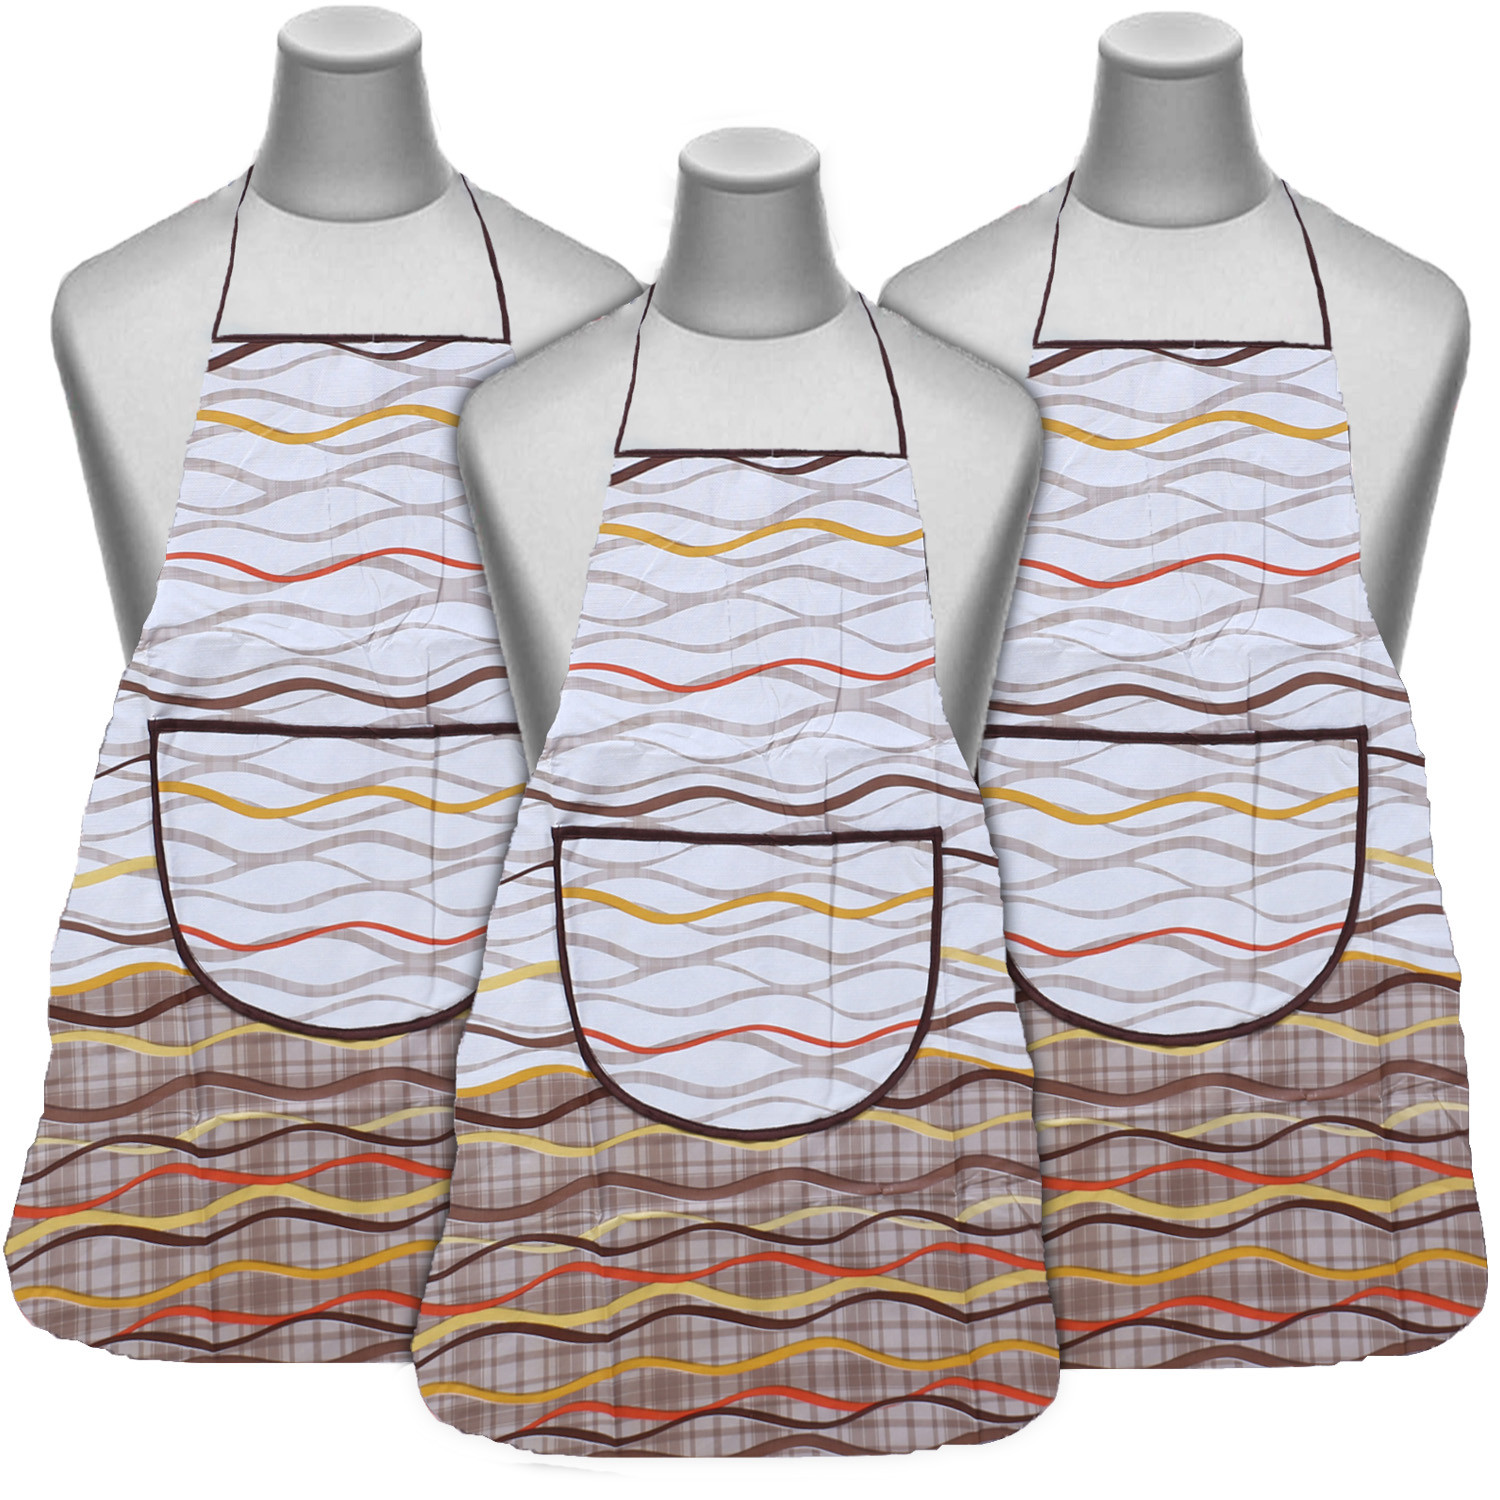 Kuber Industries Apron|PVC Unique Strips Printed Kitchen Chef Cloth|Waterproof Centre Pocket Apron With Tying Cord for Men & Women (Multicolor)